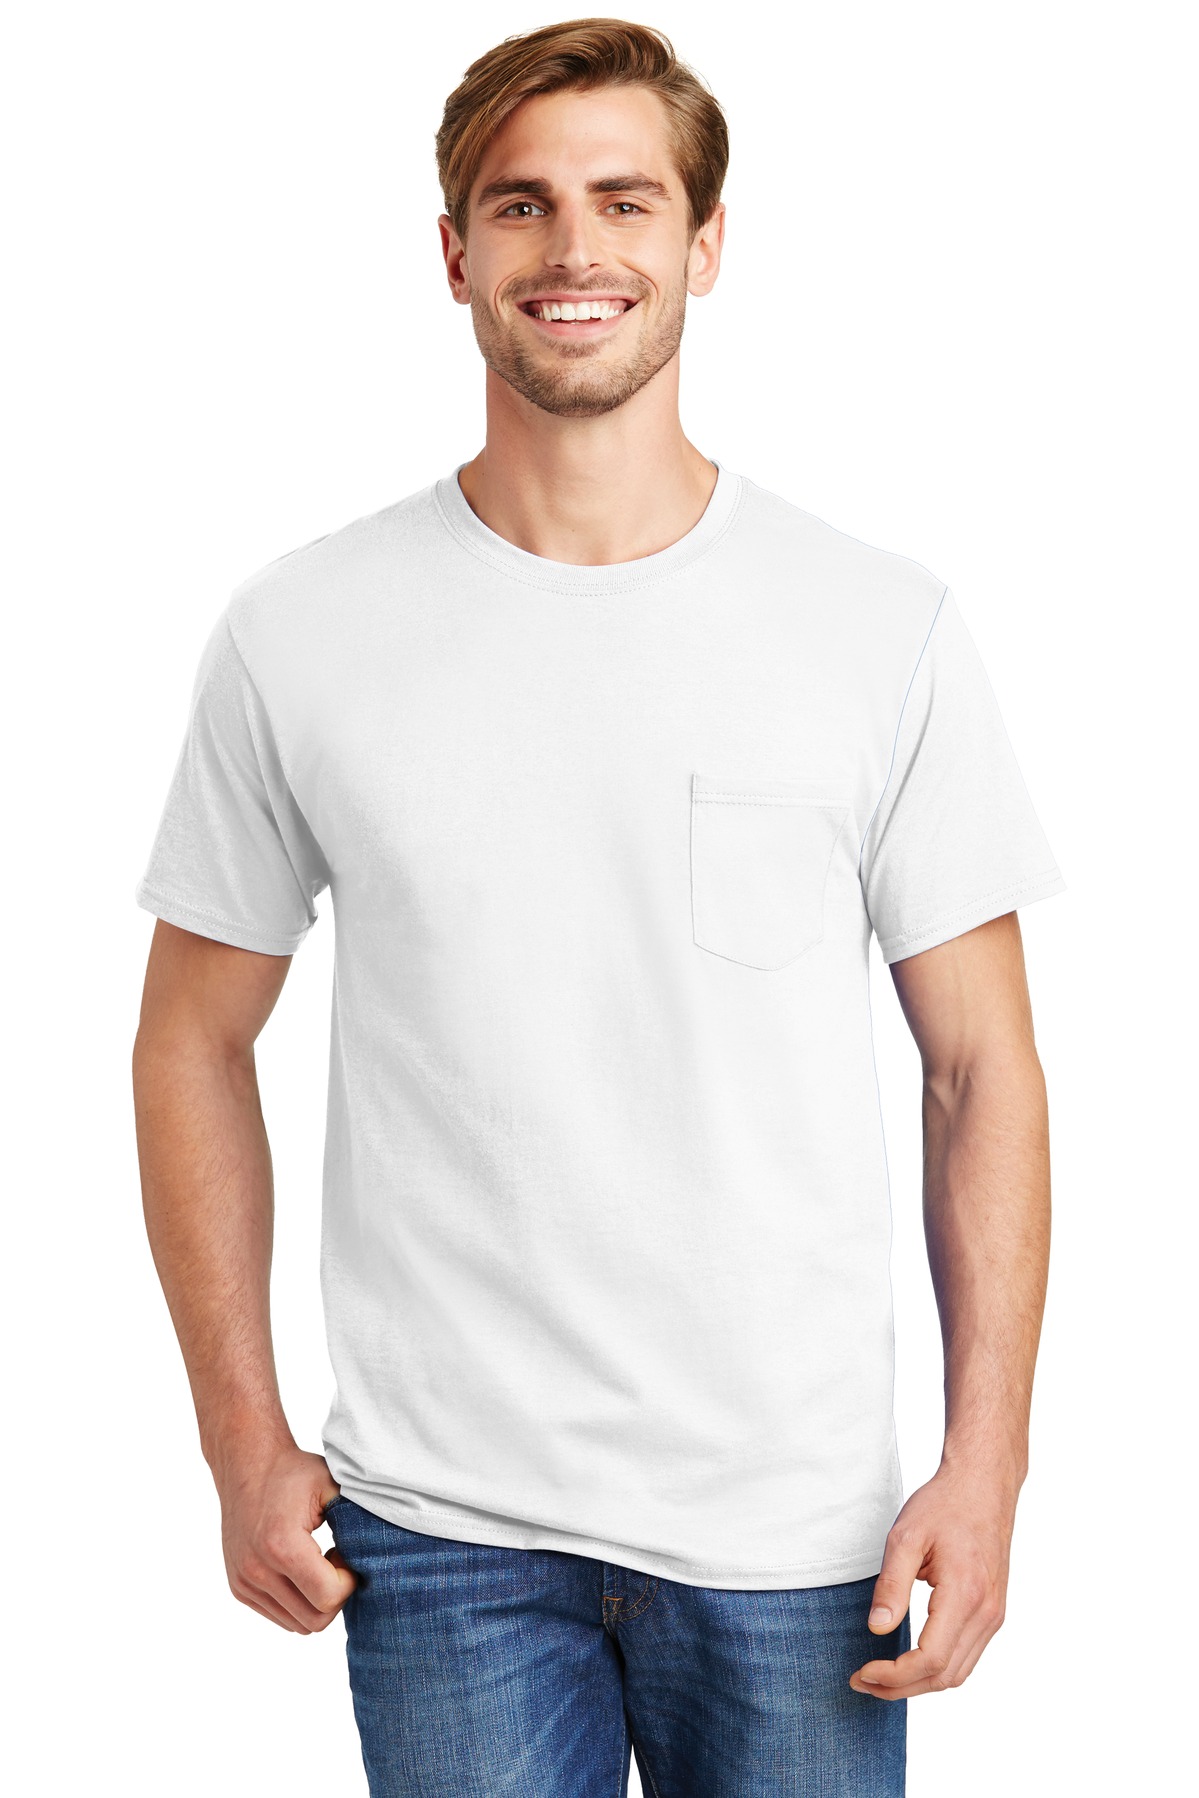 Hanes - Authentic 100% Cotton T-Shirt with Pocket-Hanes